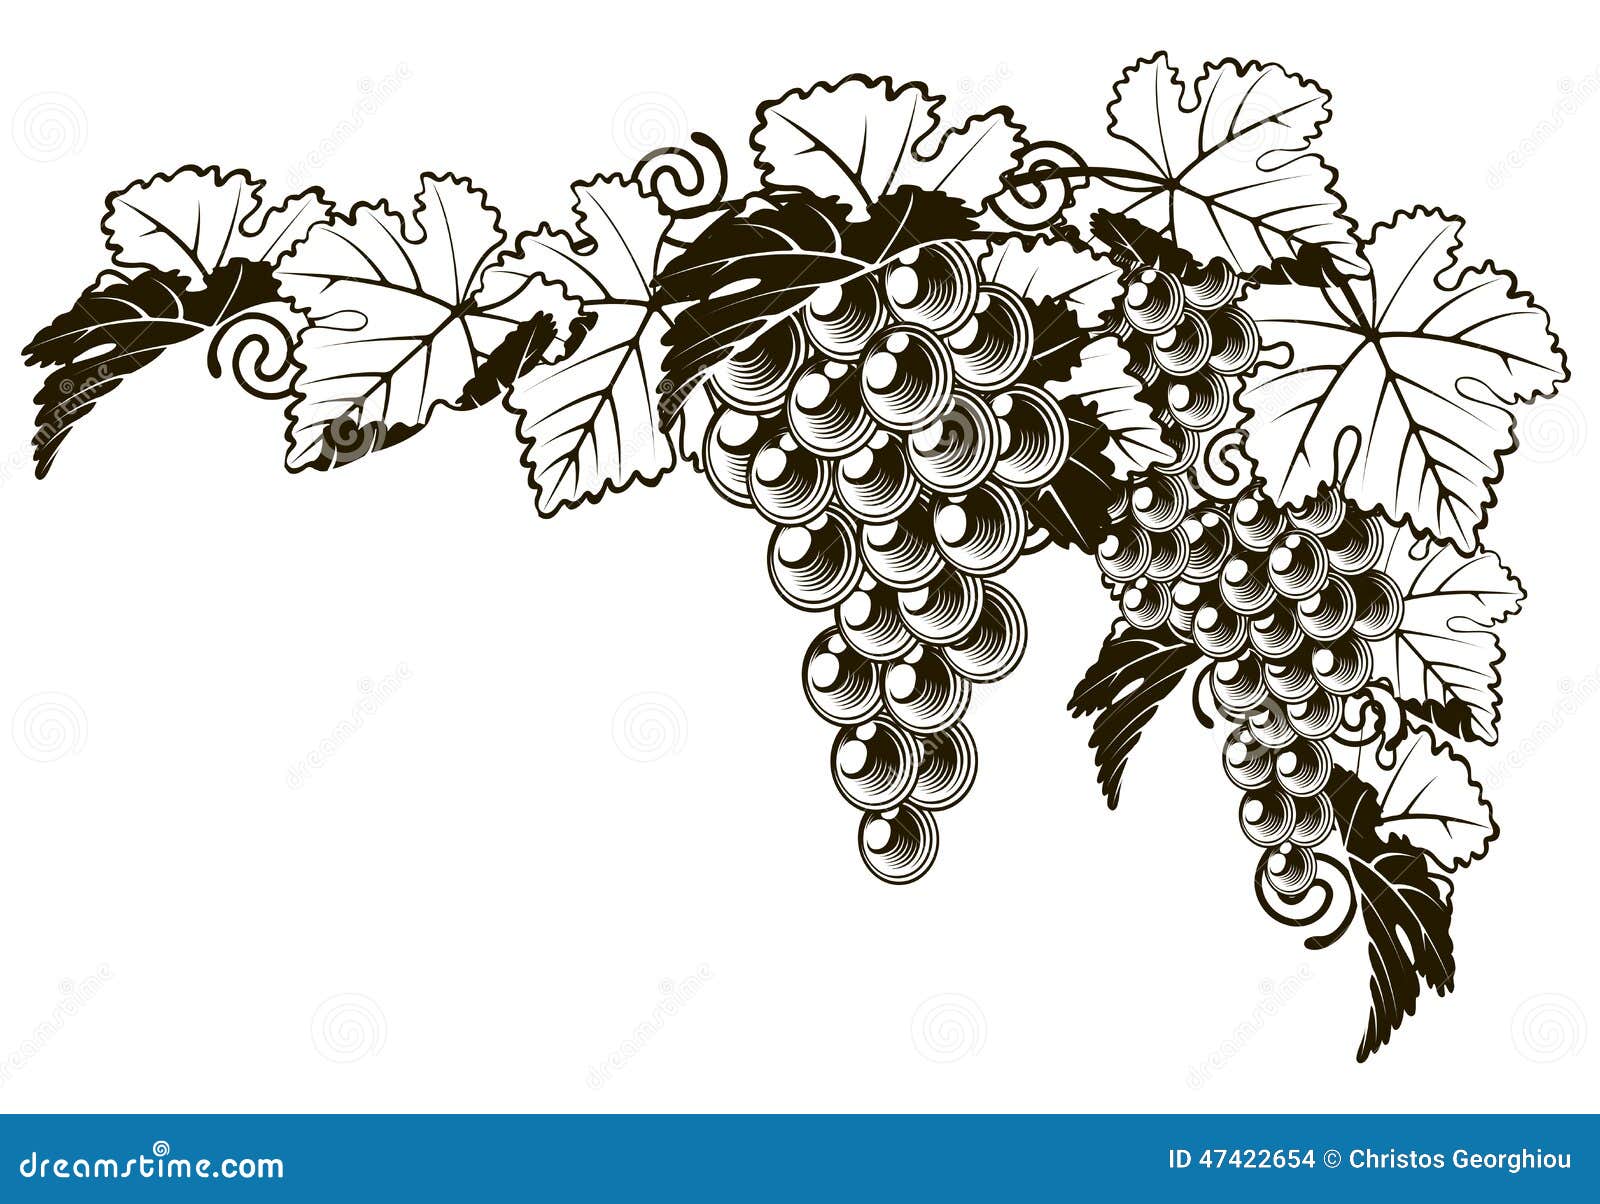 Grapes Vintage Style Design Stock Vector - Image: 47422654